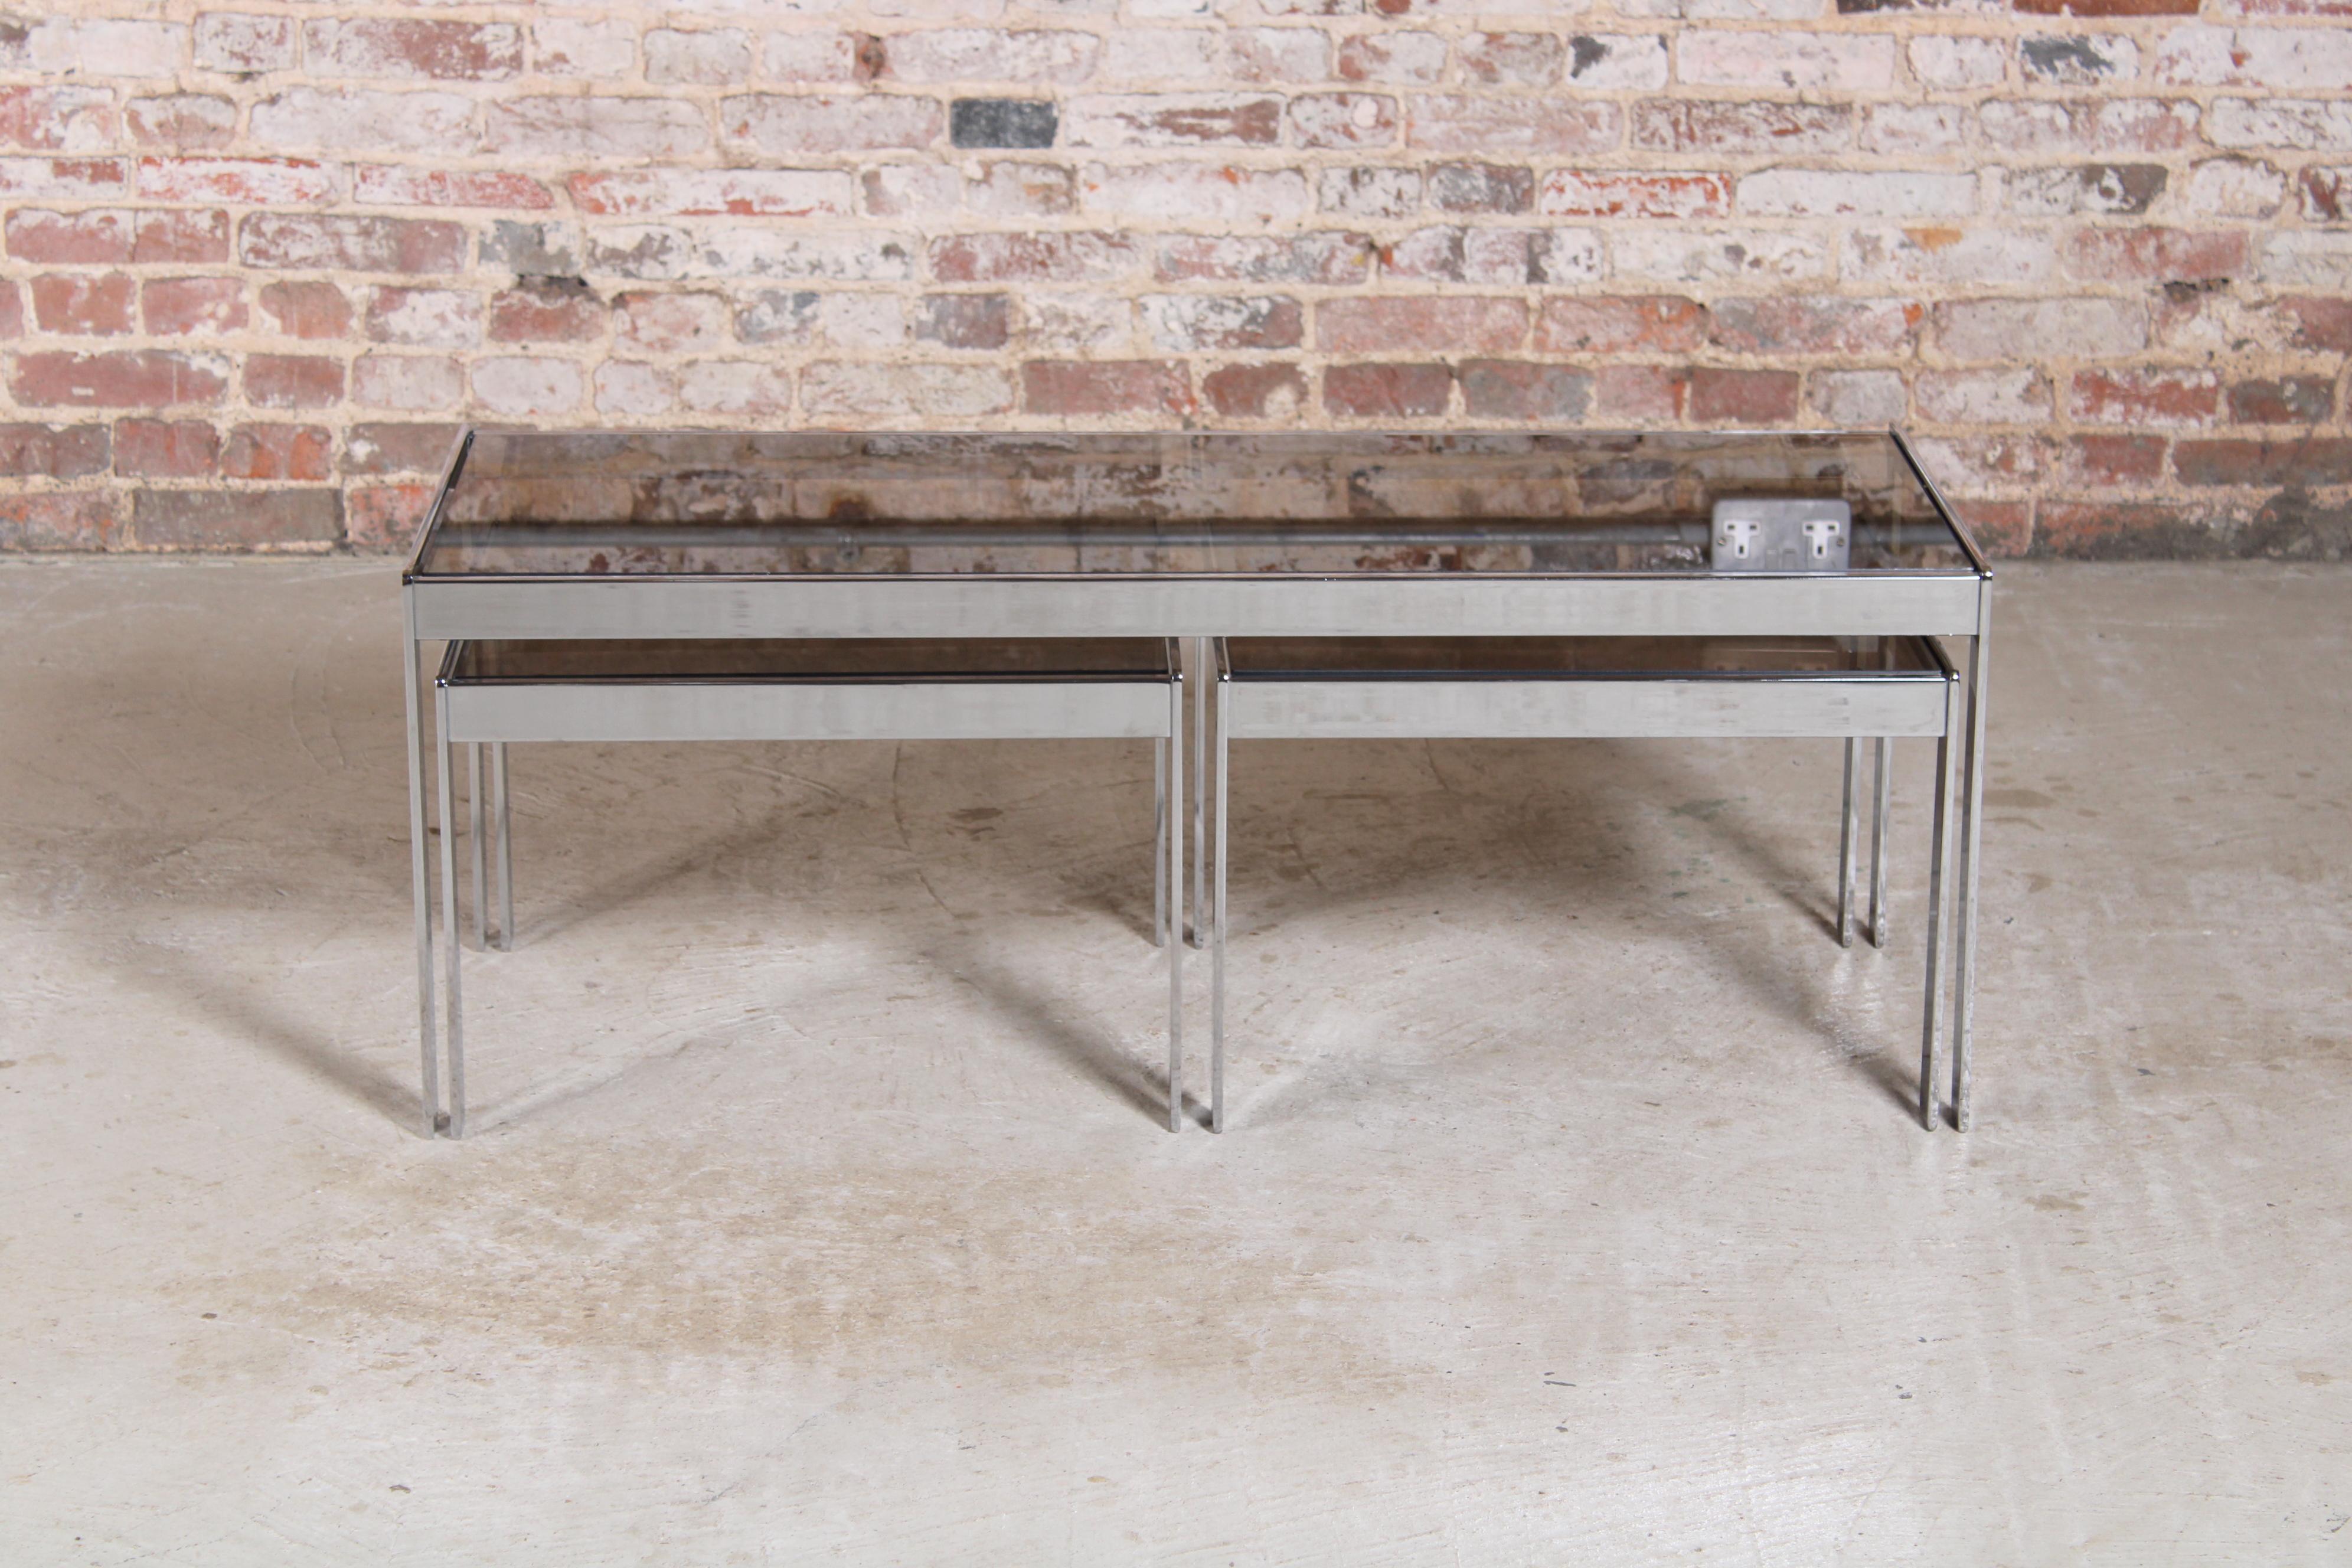 Mid Century Merrow Associates chrome and smoked glass nest of tables, circa 1970s. Minor scratches on glass.

Dimensions:
Large table: 114 W x 46 D x 43 H cm
Small table: 53.5 W x 46 D x 36 H cm.